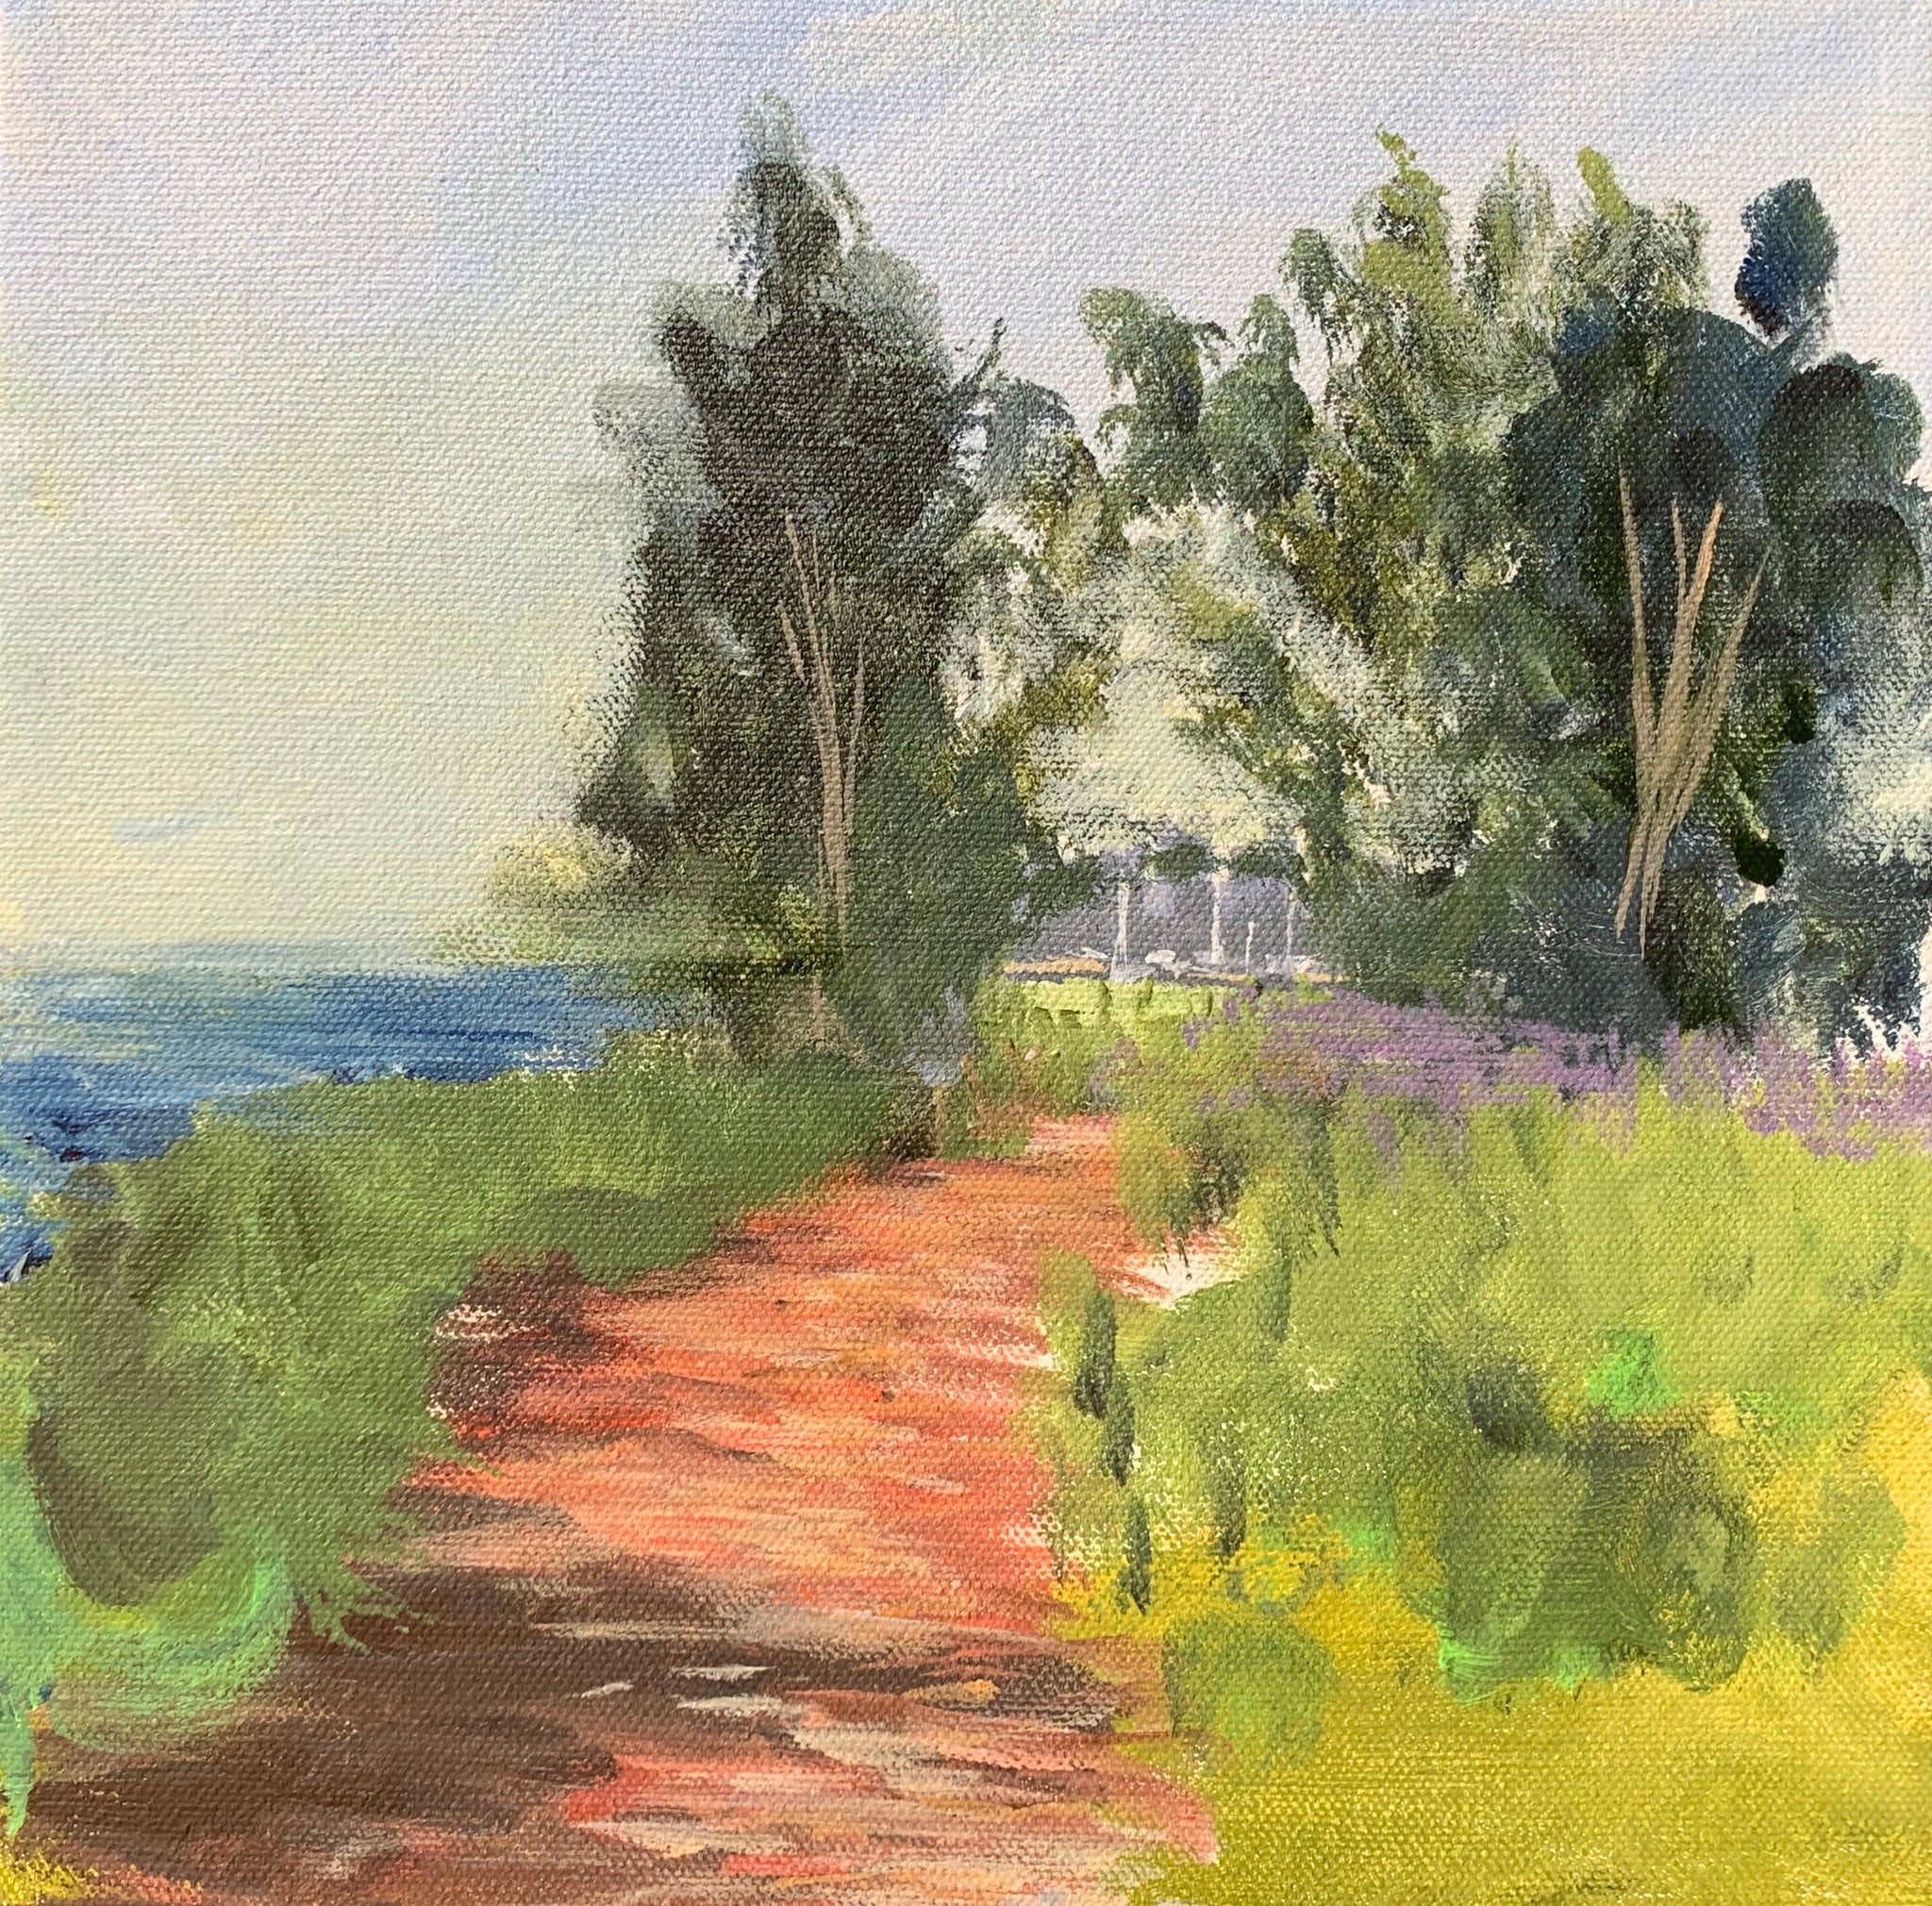 Study of Lakefront Path